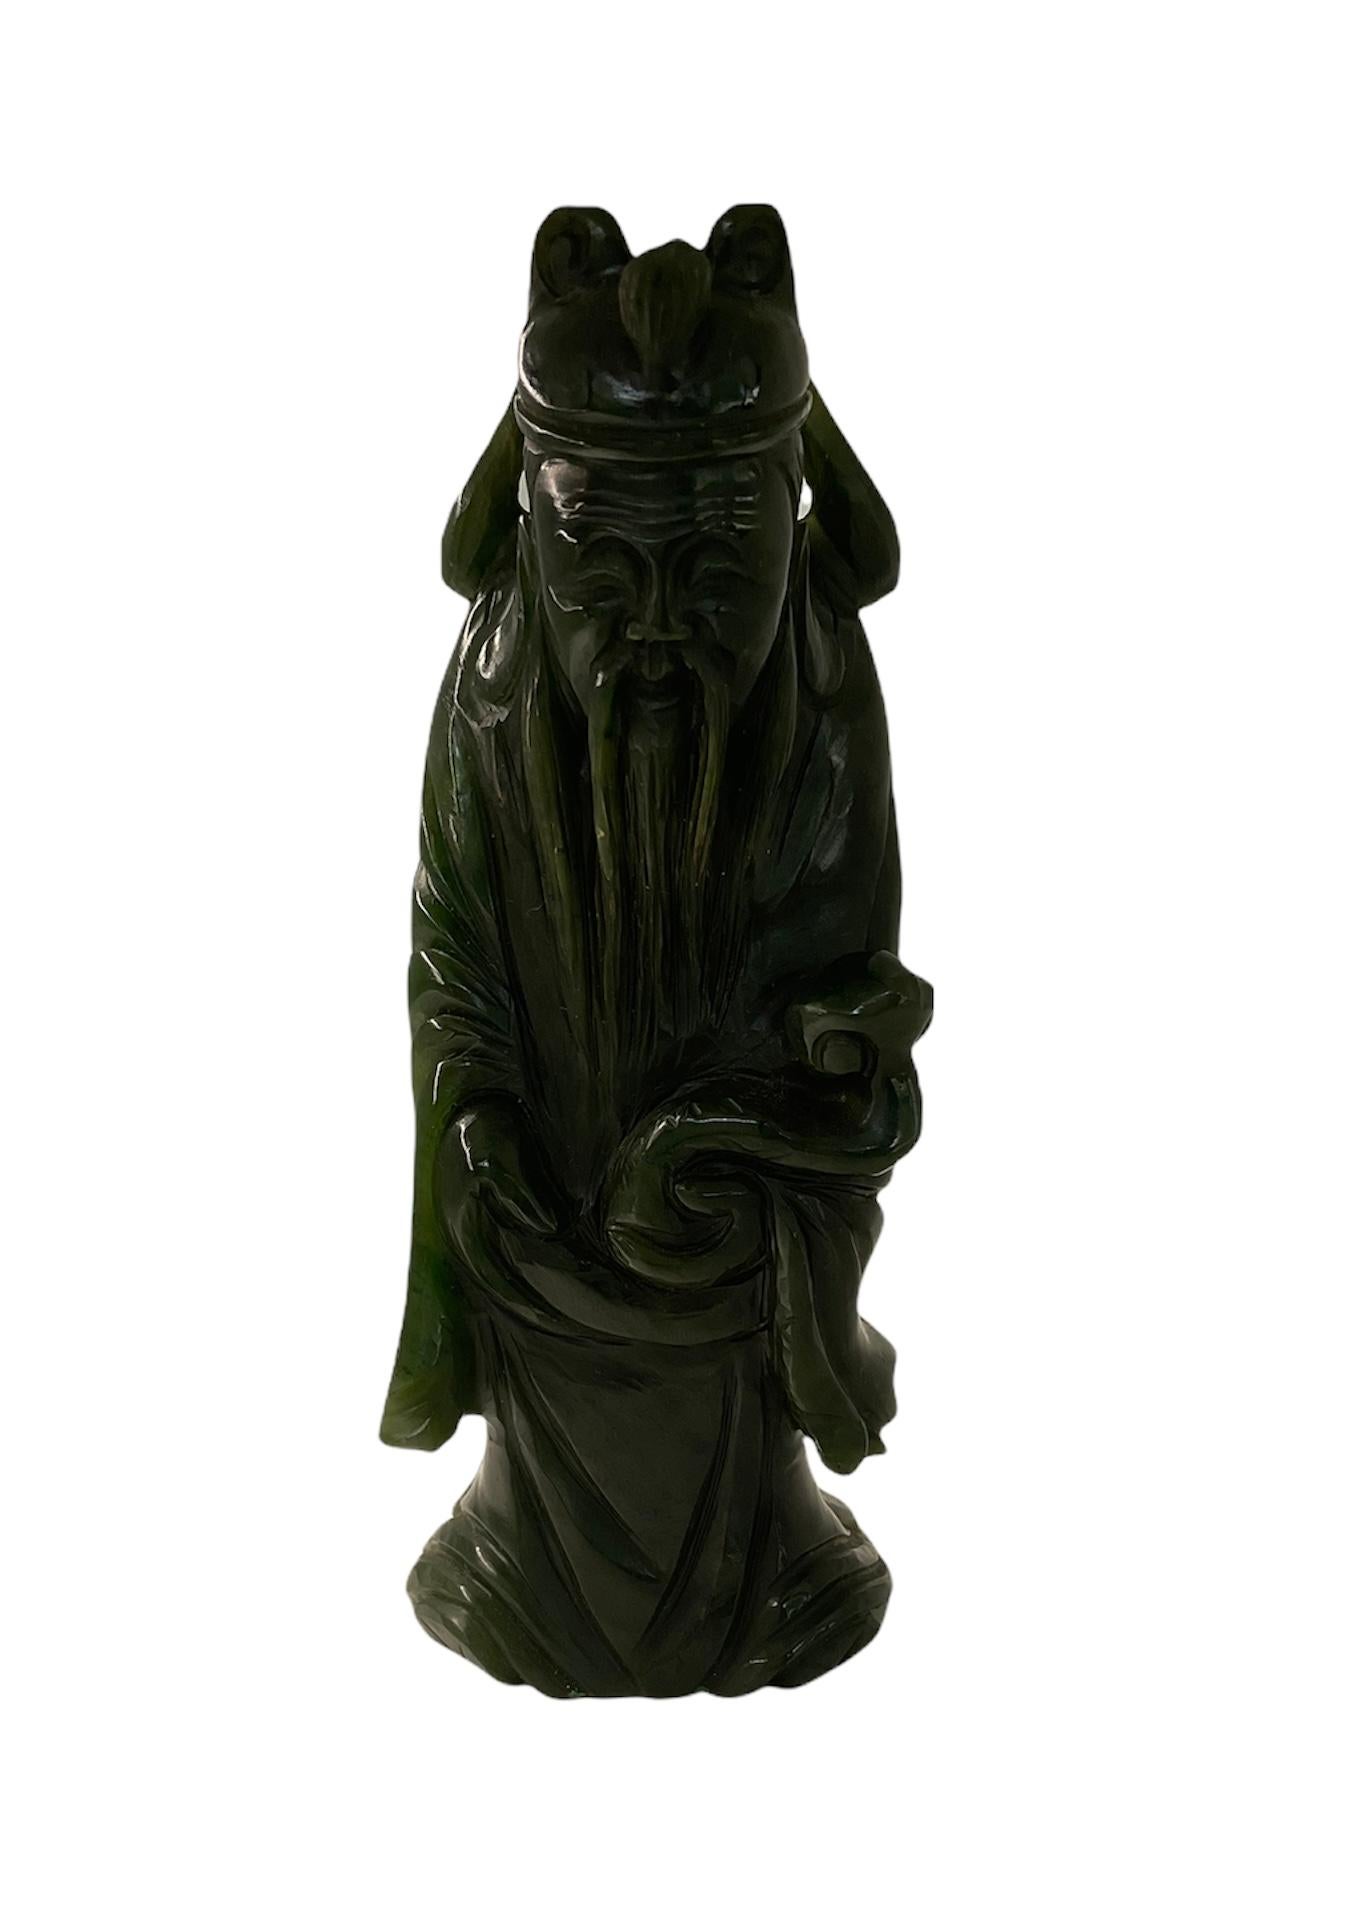 Hand Carved Green Pine Color Jade Small Chinese Wise Man Sculpture/Figurine 4